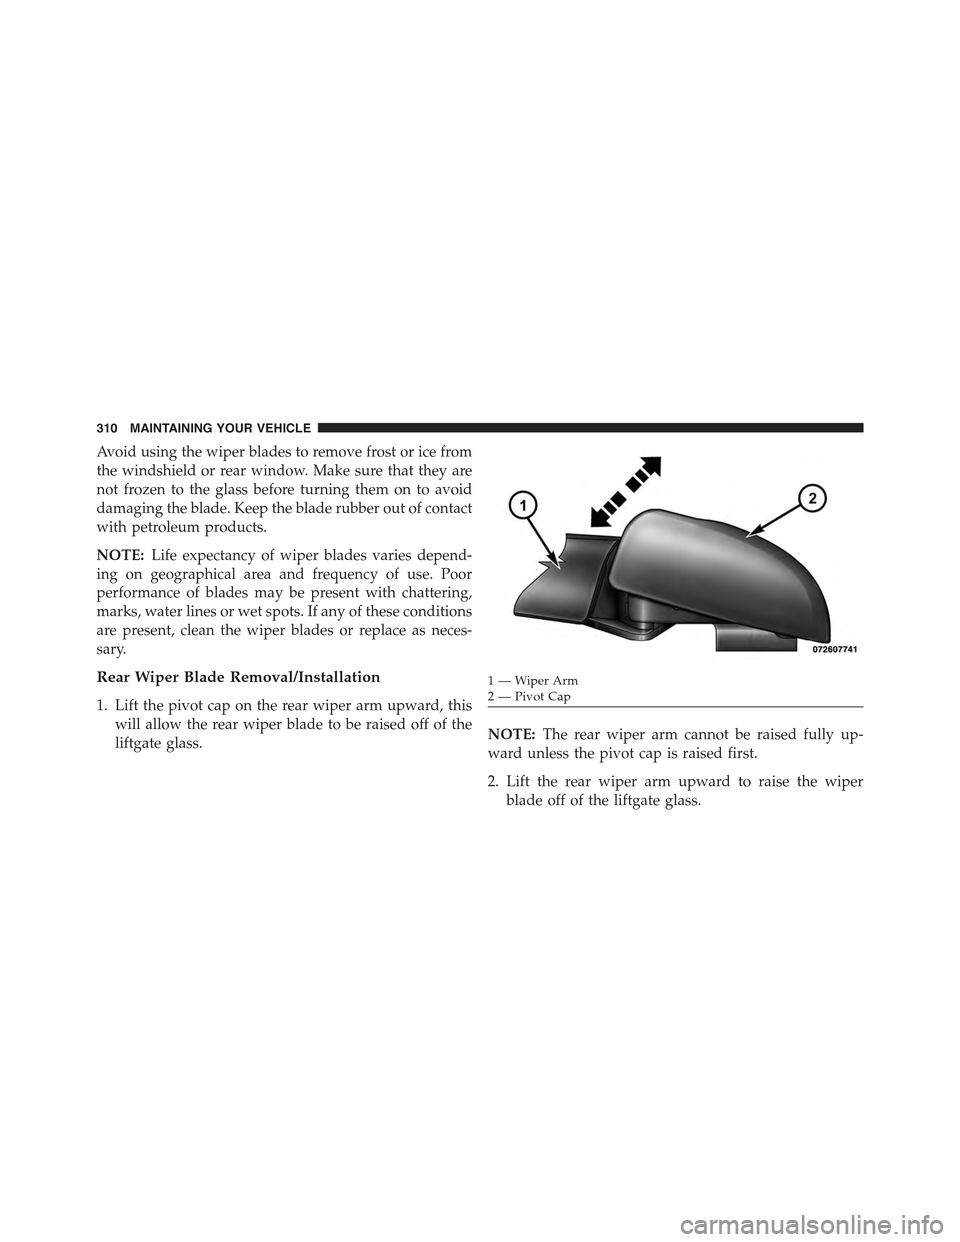 FIAT 500E 2015 2.G Owners Manual Avoid using the wiper blades to remove frost or ice from
the windshield or rear window. Make sure that they are
not frozen to the glass before turning them on to avoid
damaging the blade. Keep the bla